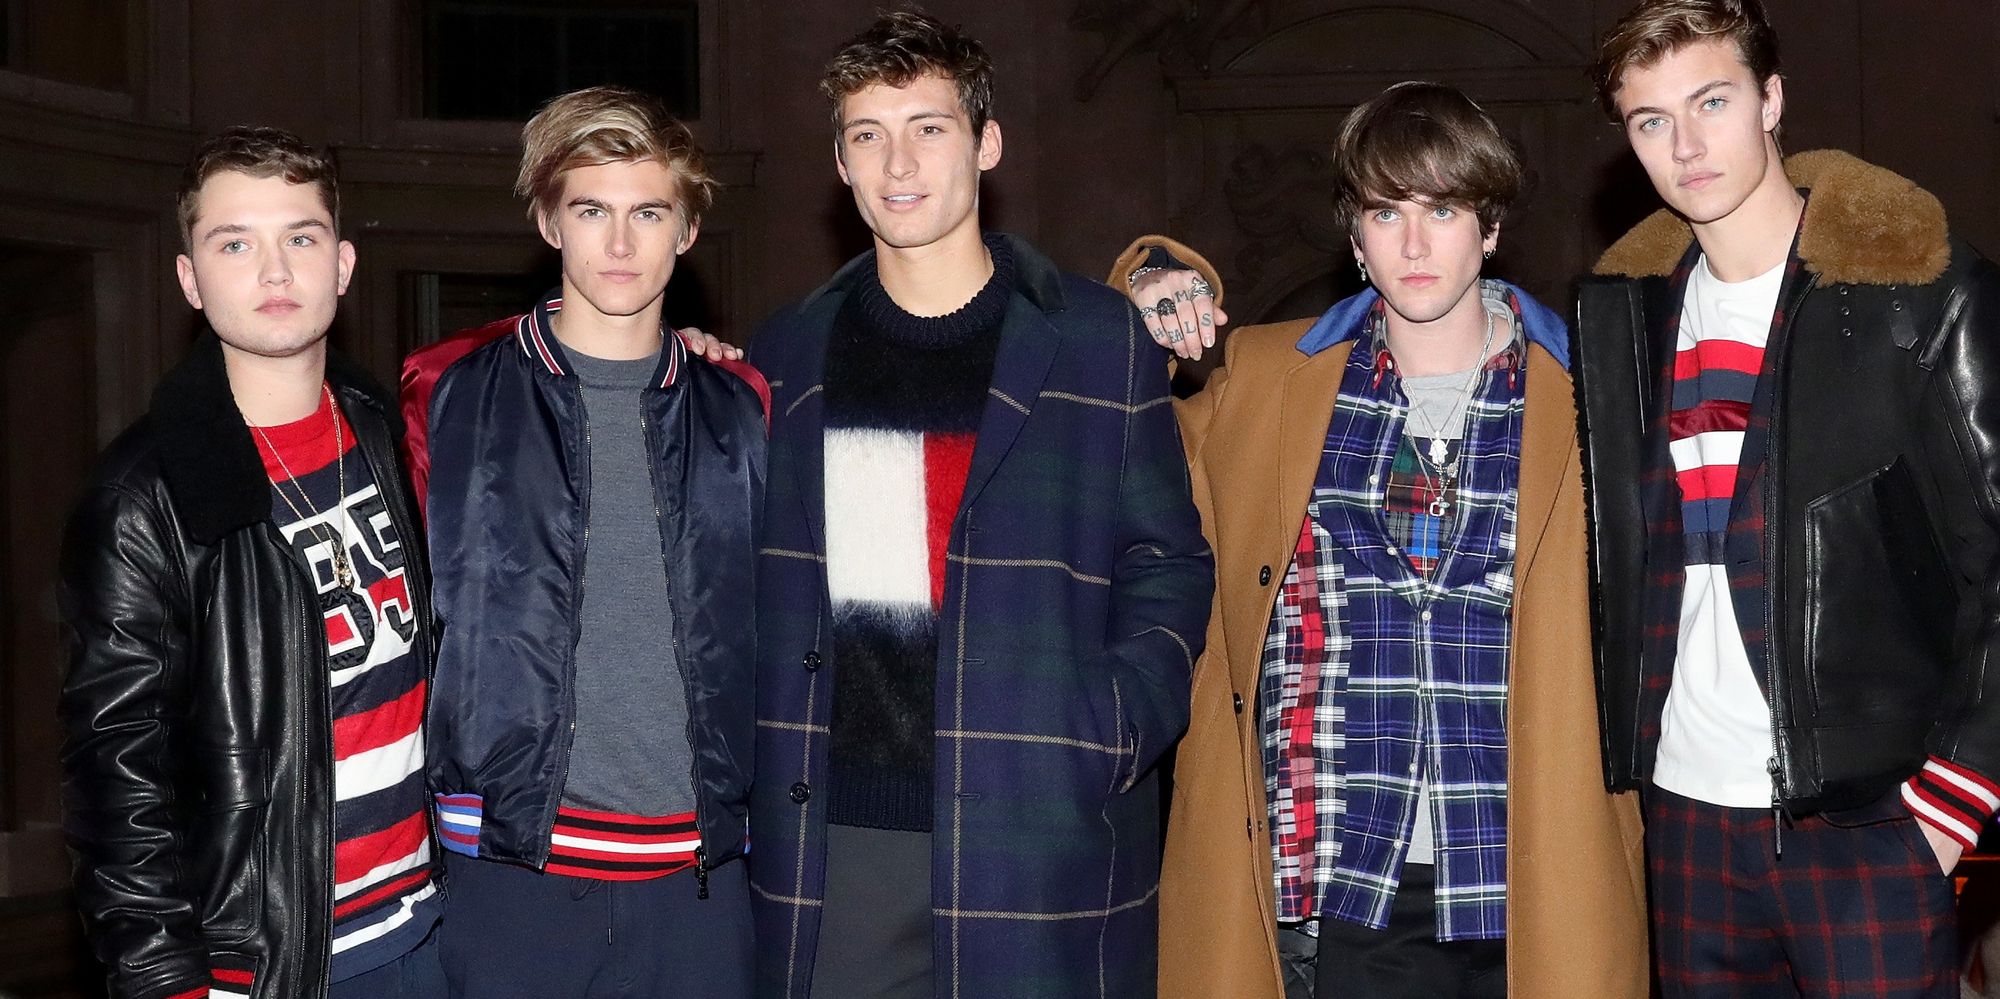 Jude Law, Cindy Crawford And Daniel Day-Lewis' Sons Model For Tommy Hilfiger At Florence Presentation - Huffington Post UK